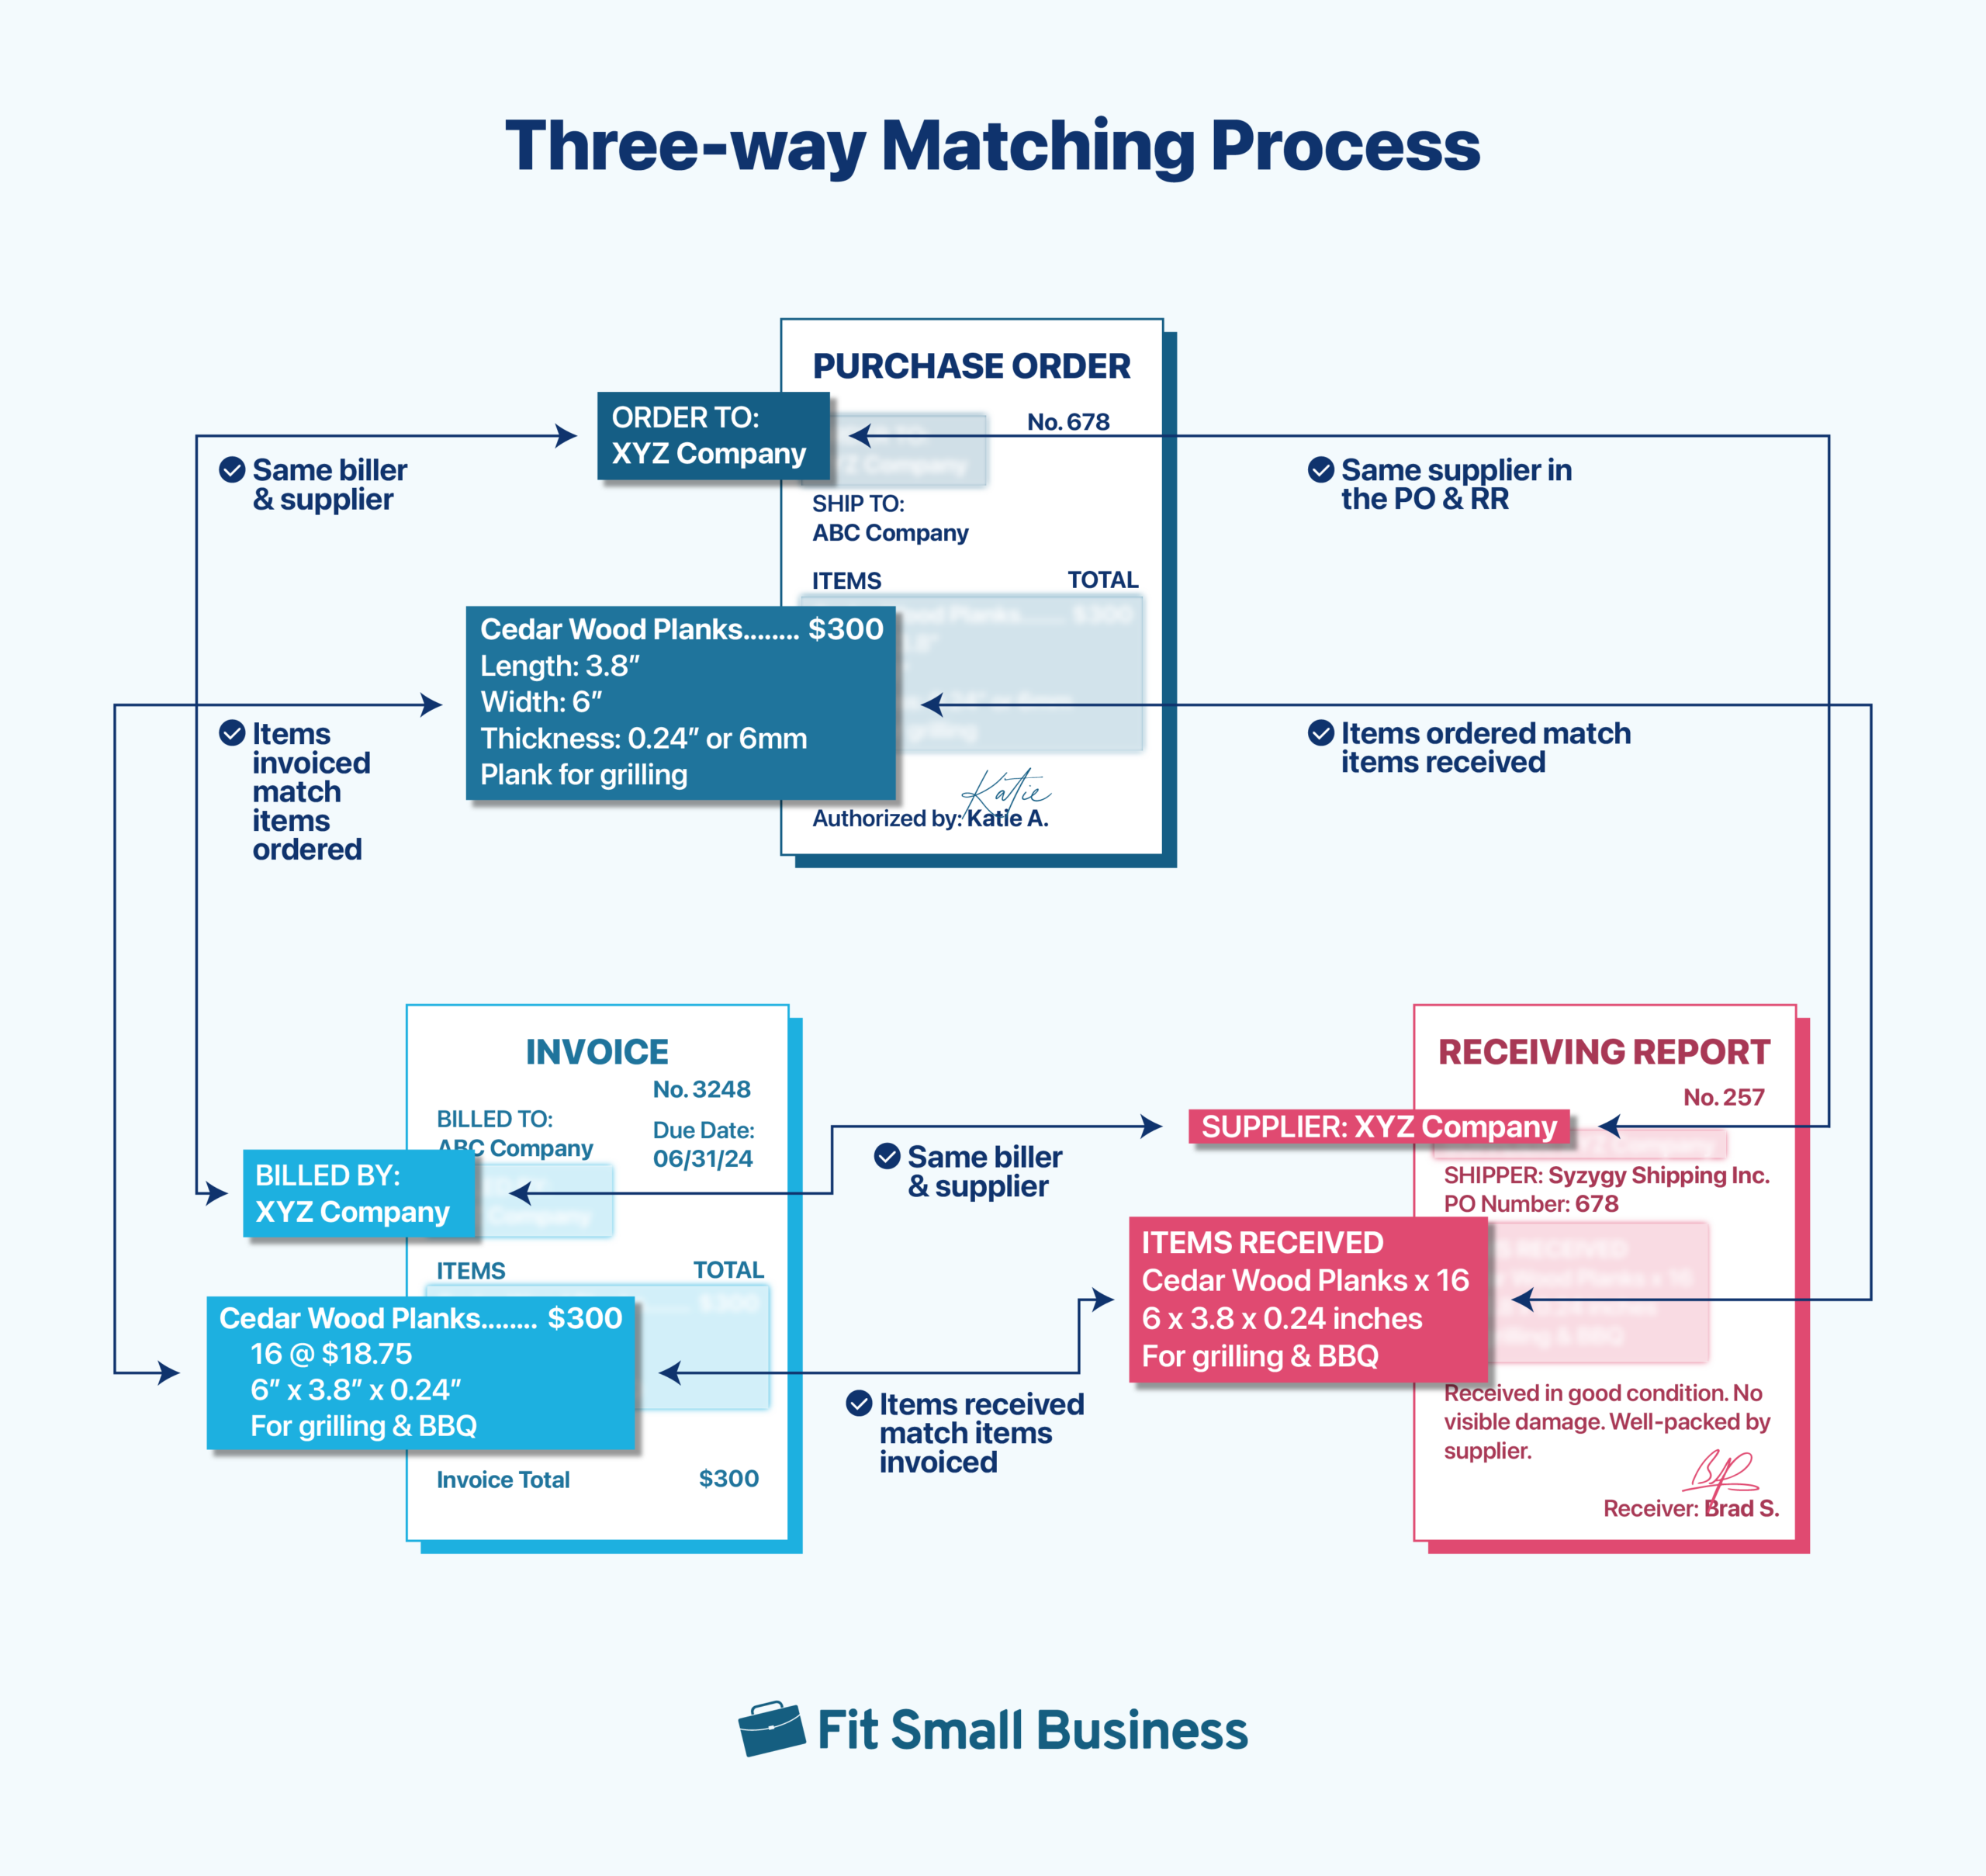 A graphic design illustrating the Three Way Matching Process.